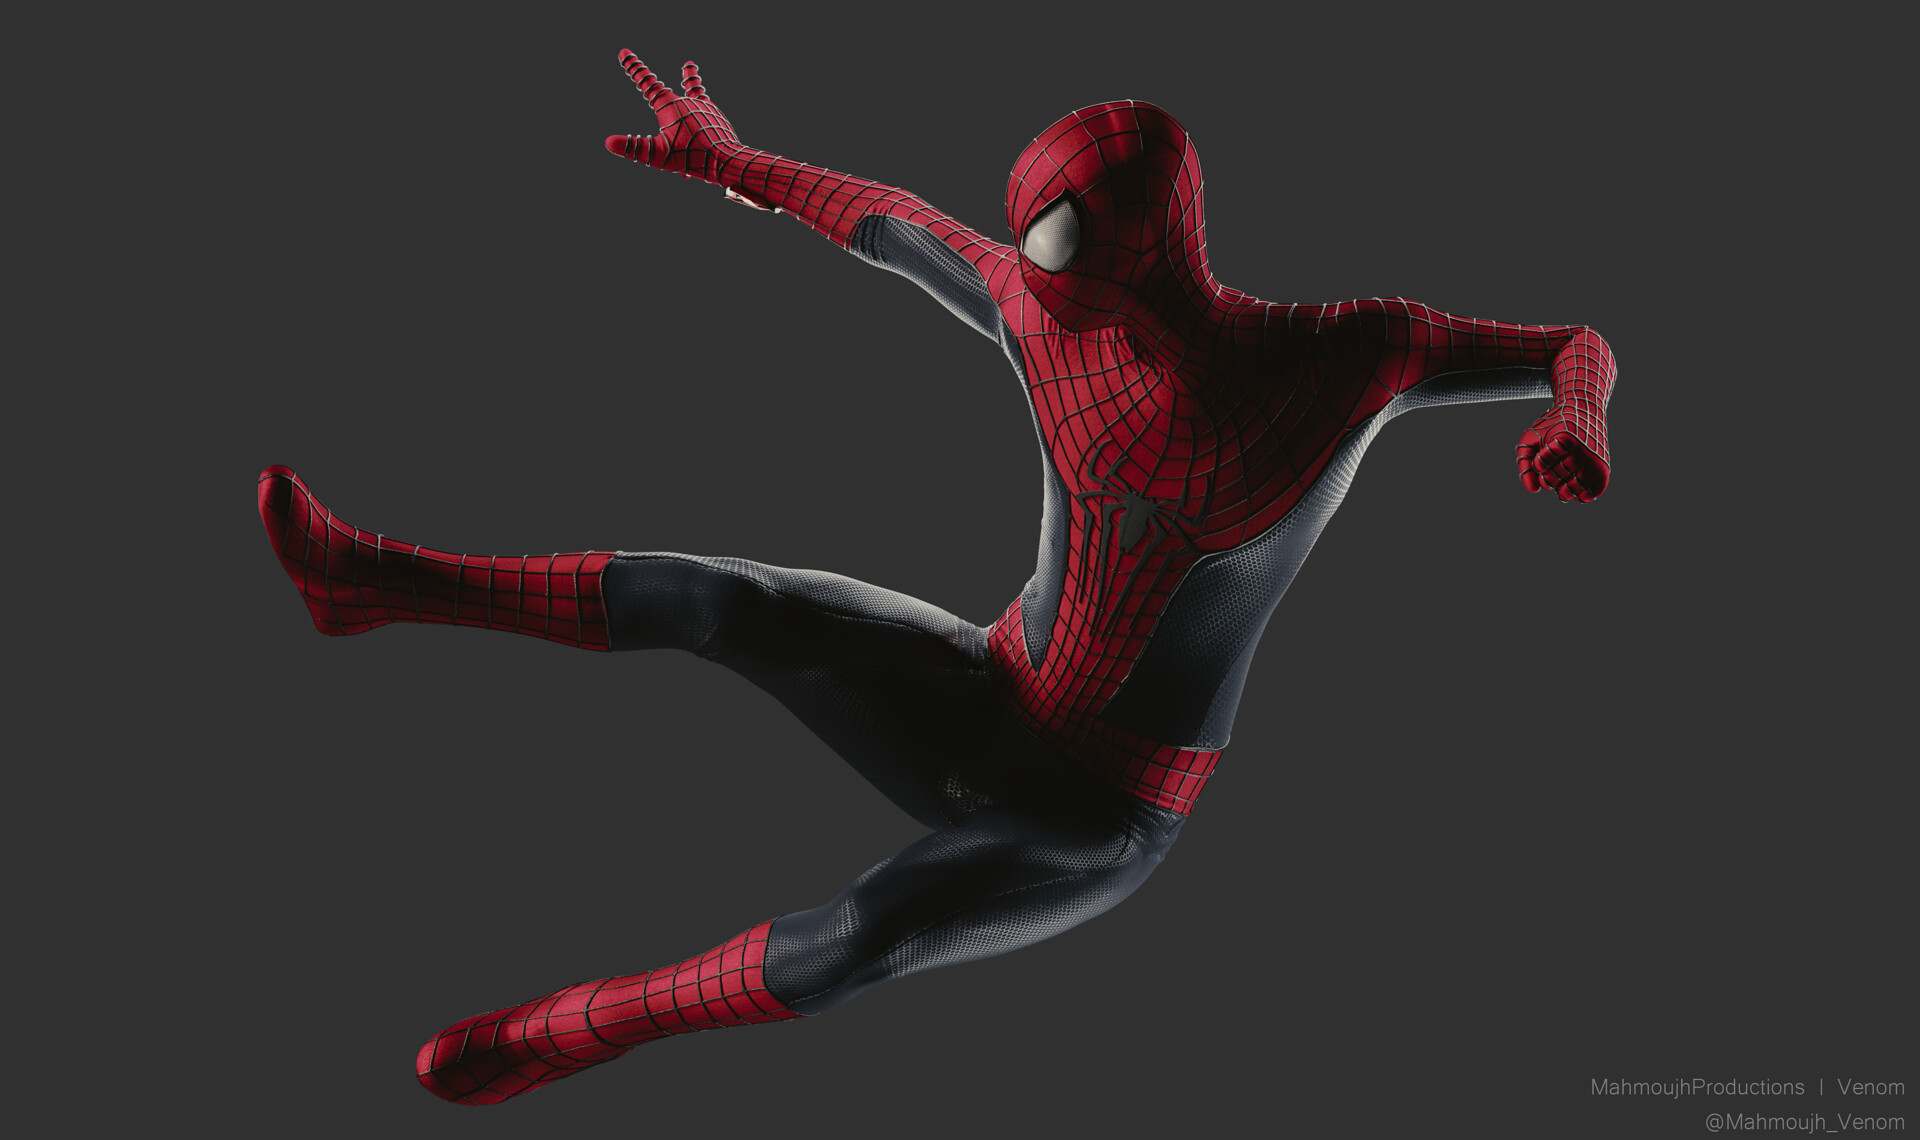 The amazing spider man 2 by AAS – www.AAS.com